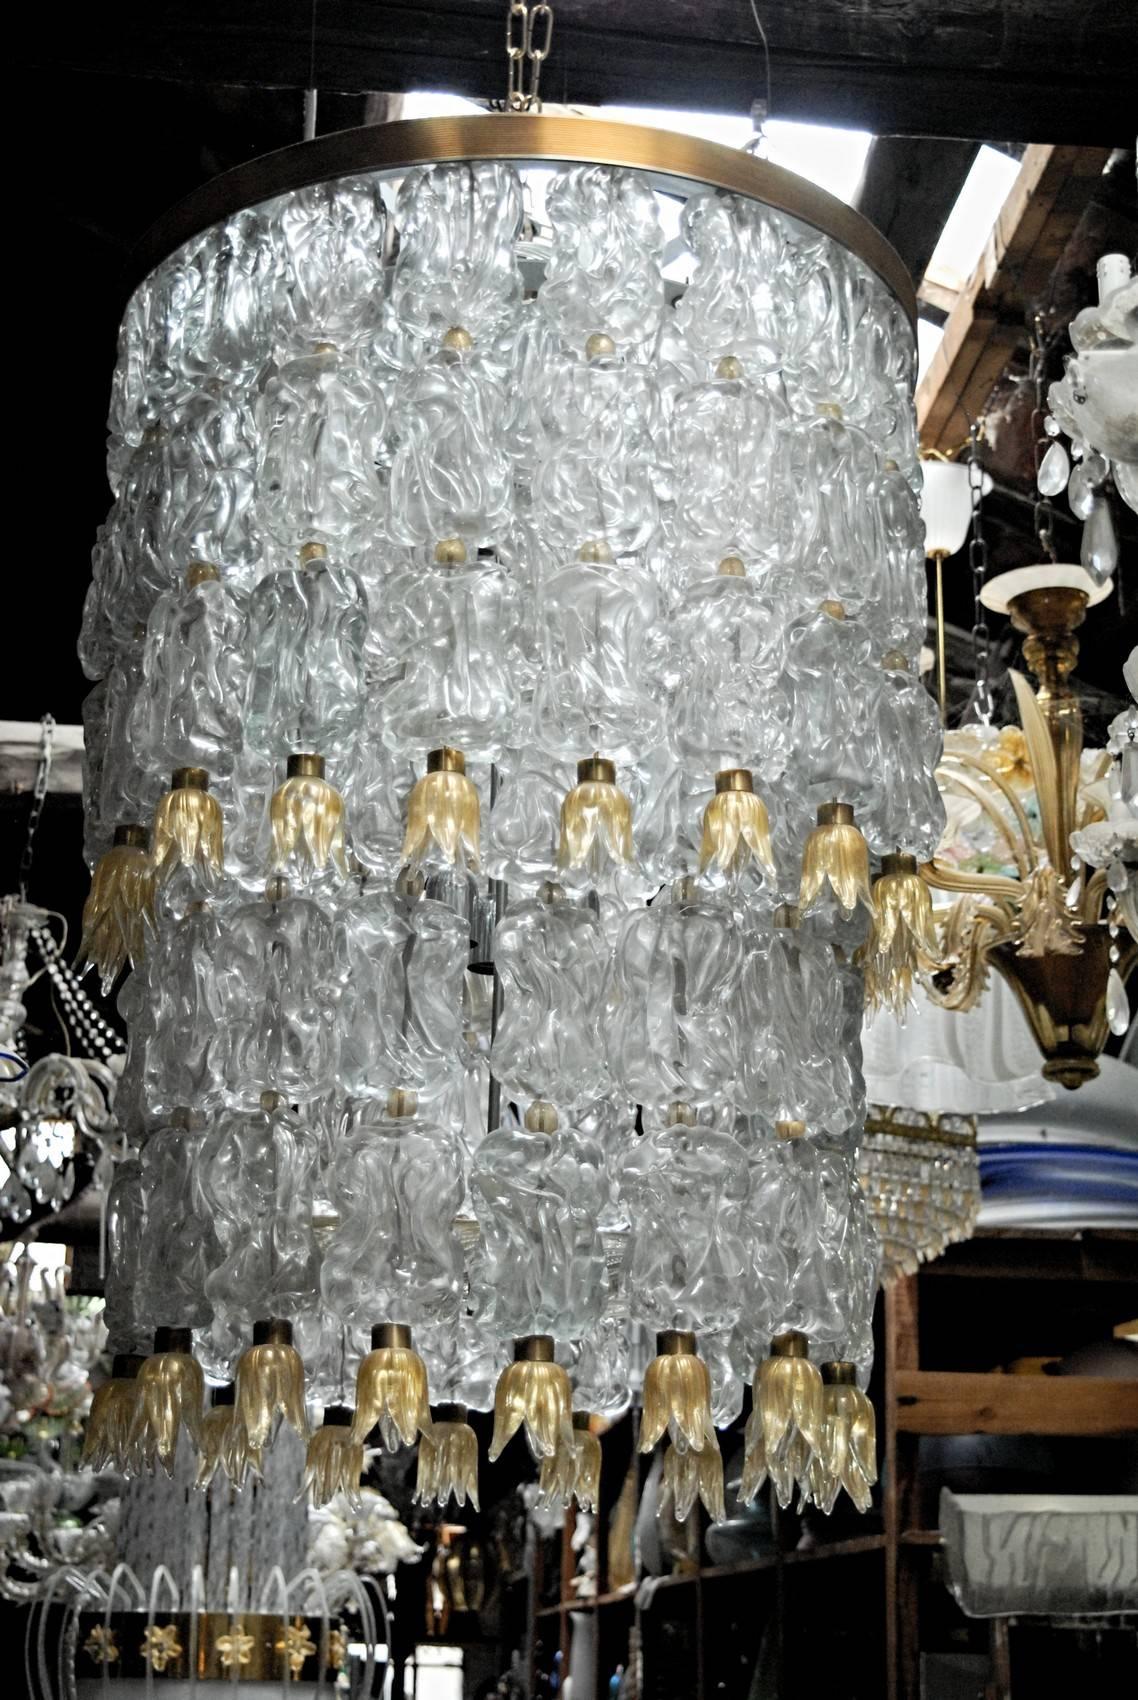 A real rare find. This is a Barovier and Toso ice blocks chandelier. Each element is made as a sculpture 